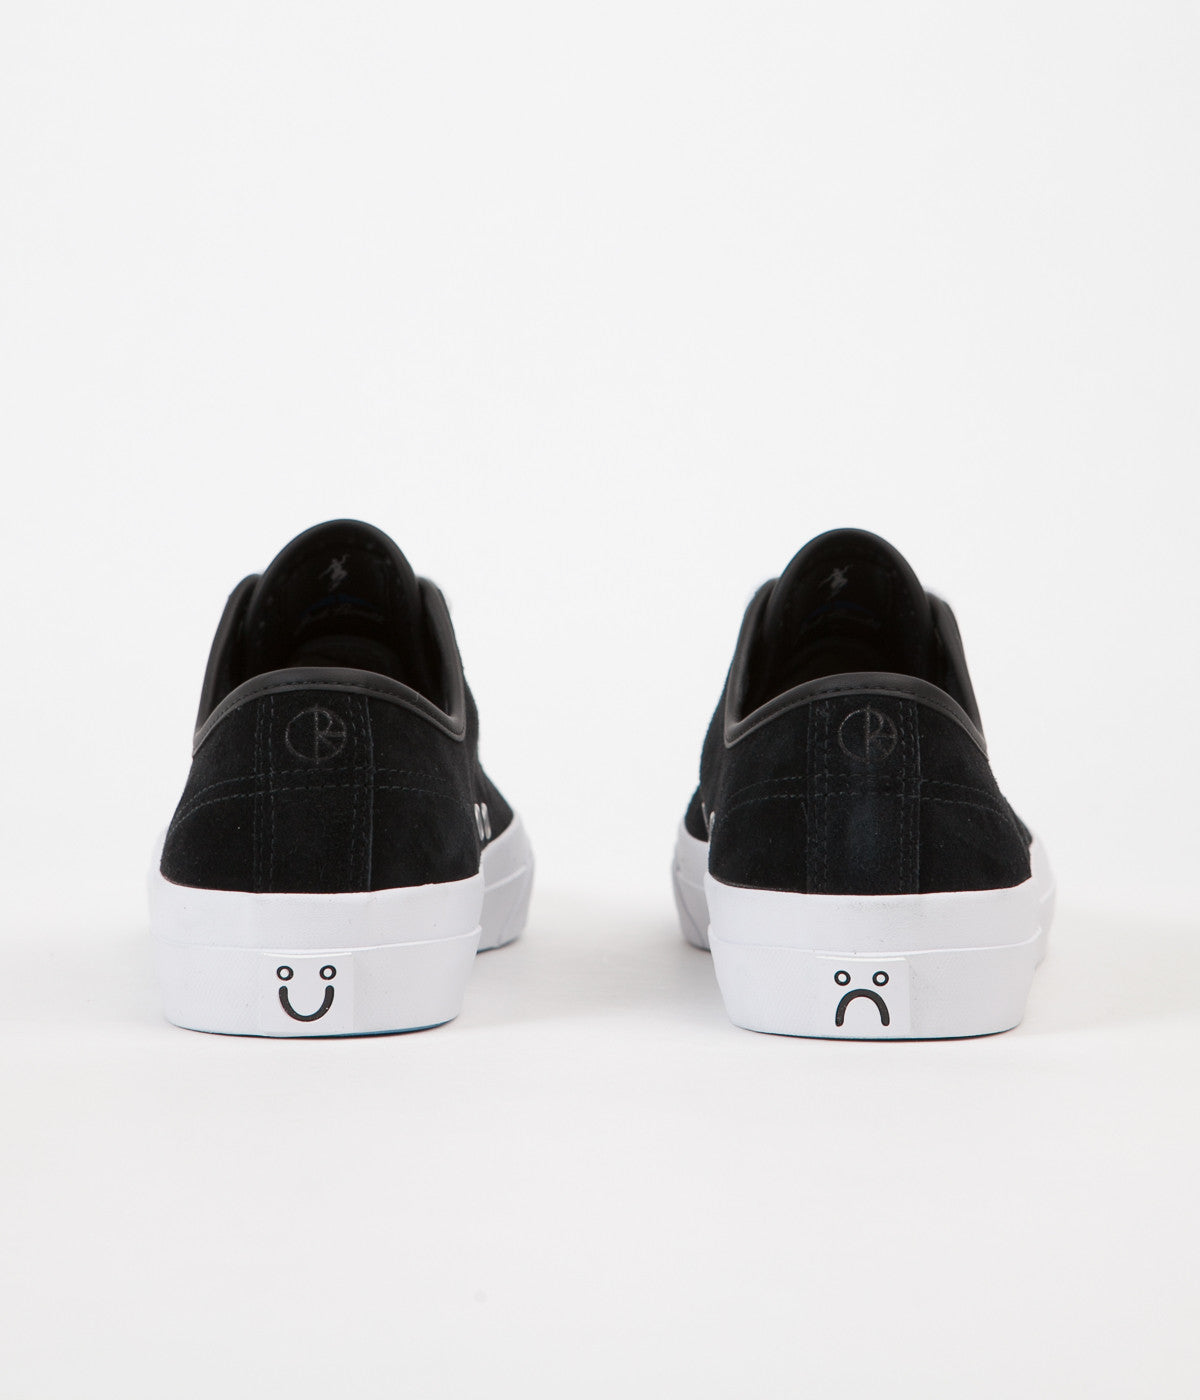 converse x polar jack purcell jp pro ox shoes